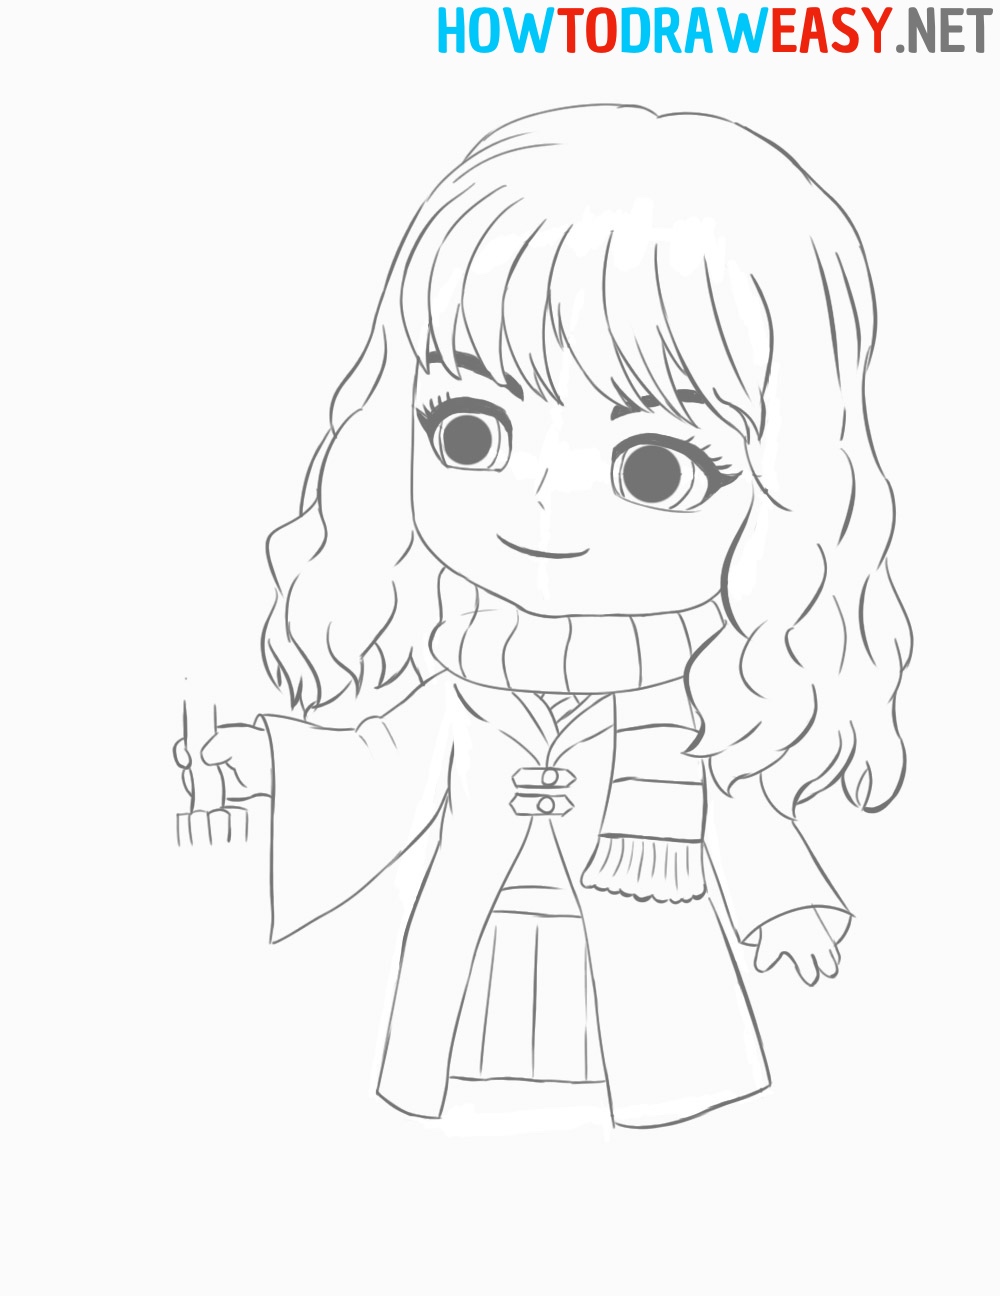 How to Draw Easy Hermione Granger